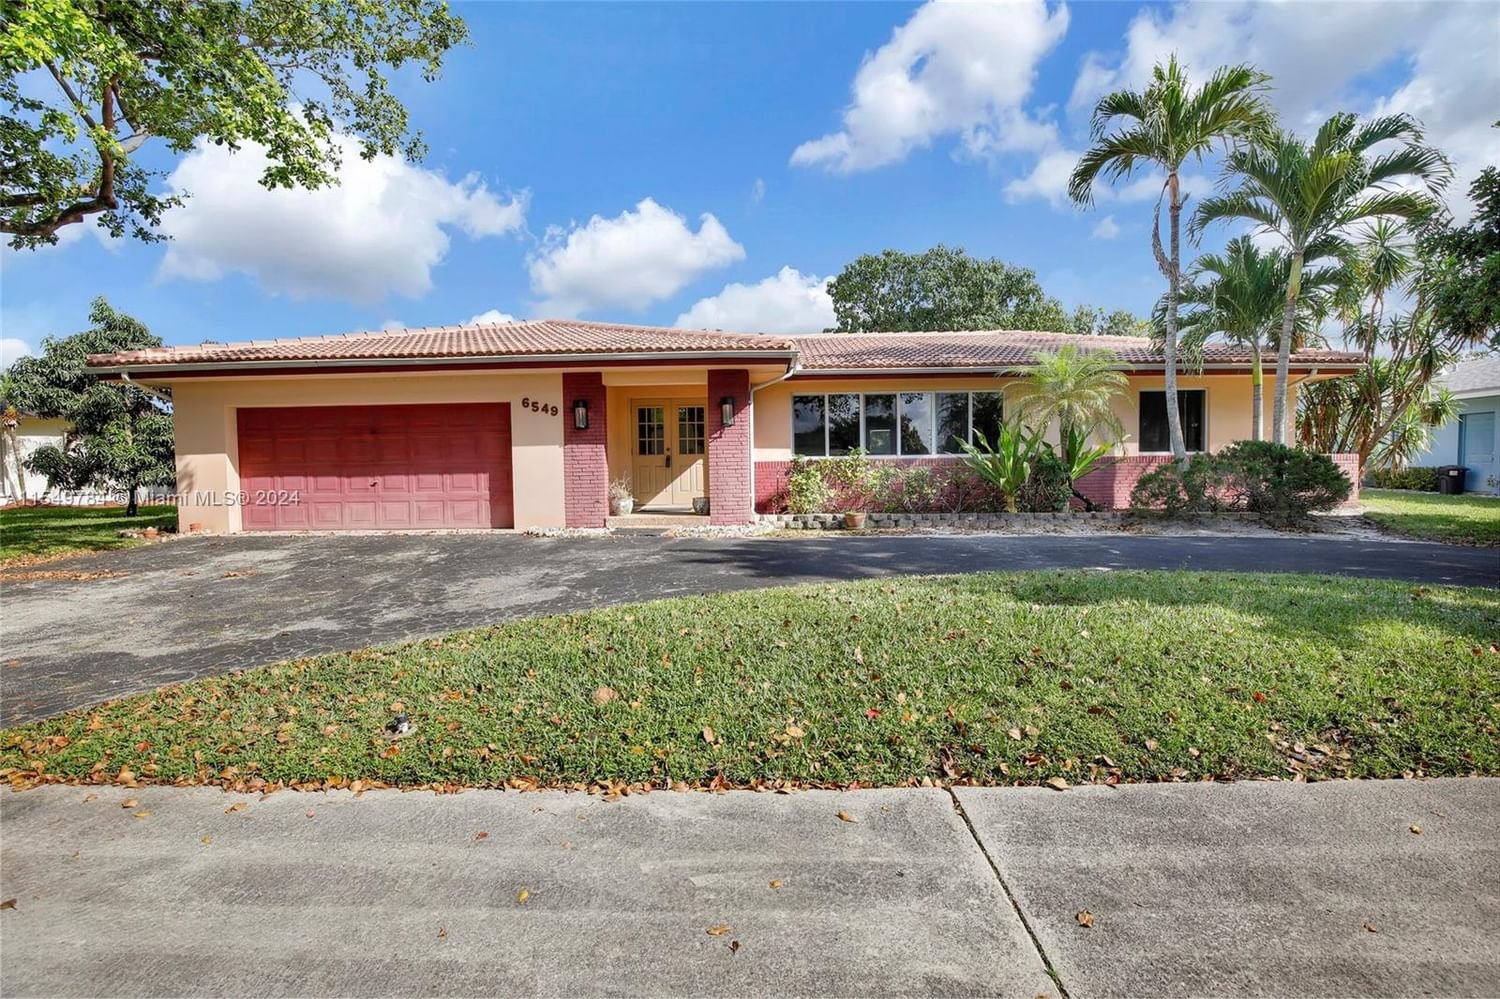 Real estate property located at 6549 20th Ct, Broward County, LAKEVIEW ESTATES SEC 2, Plantation, FL